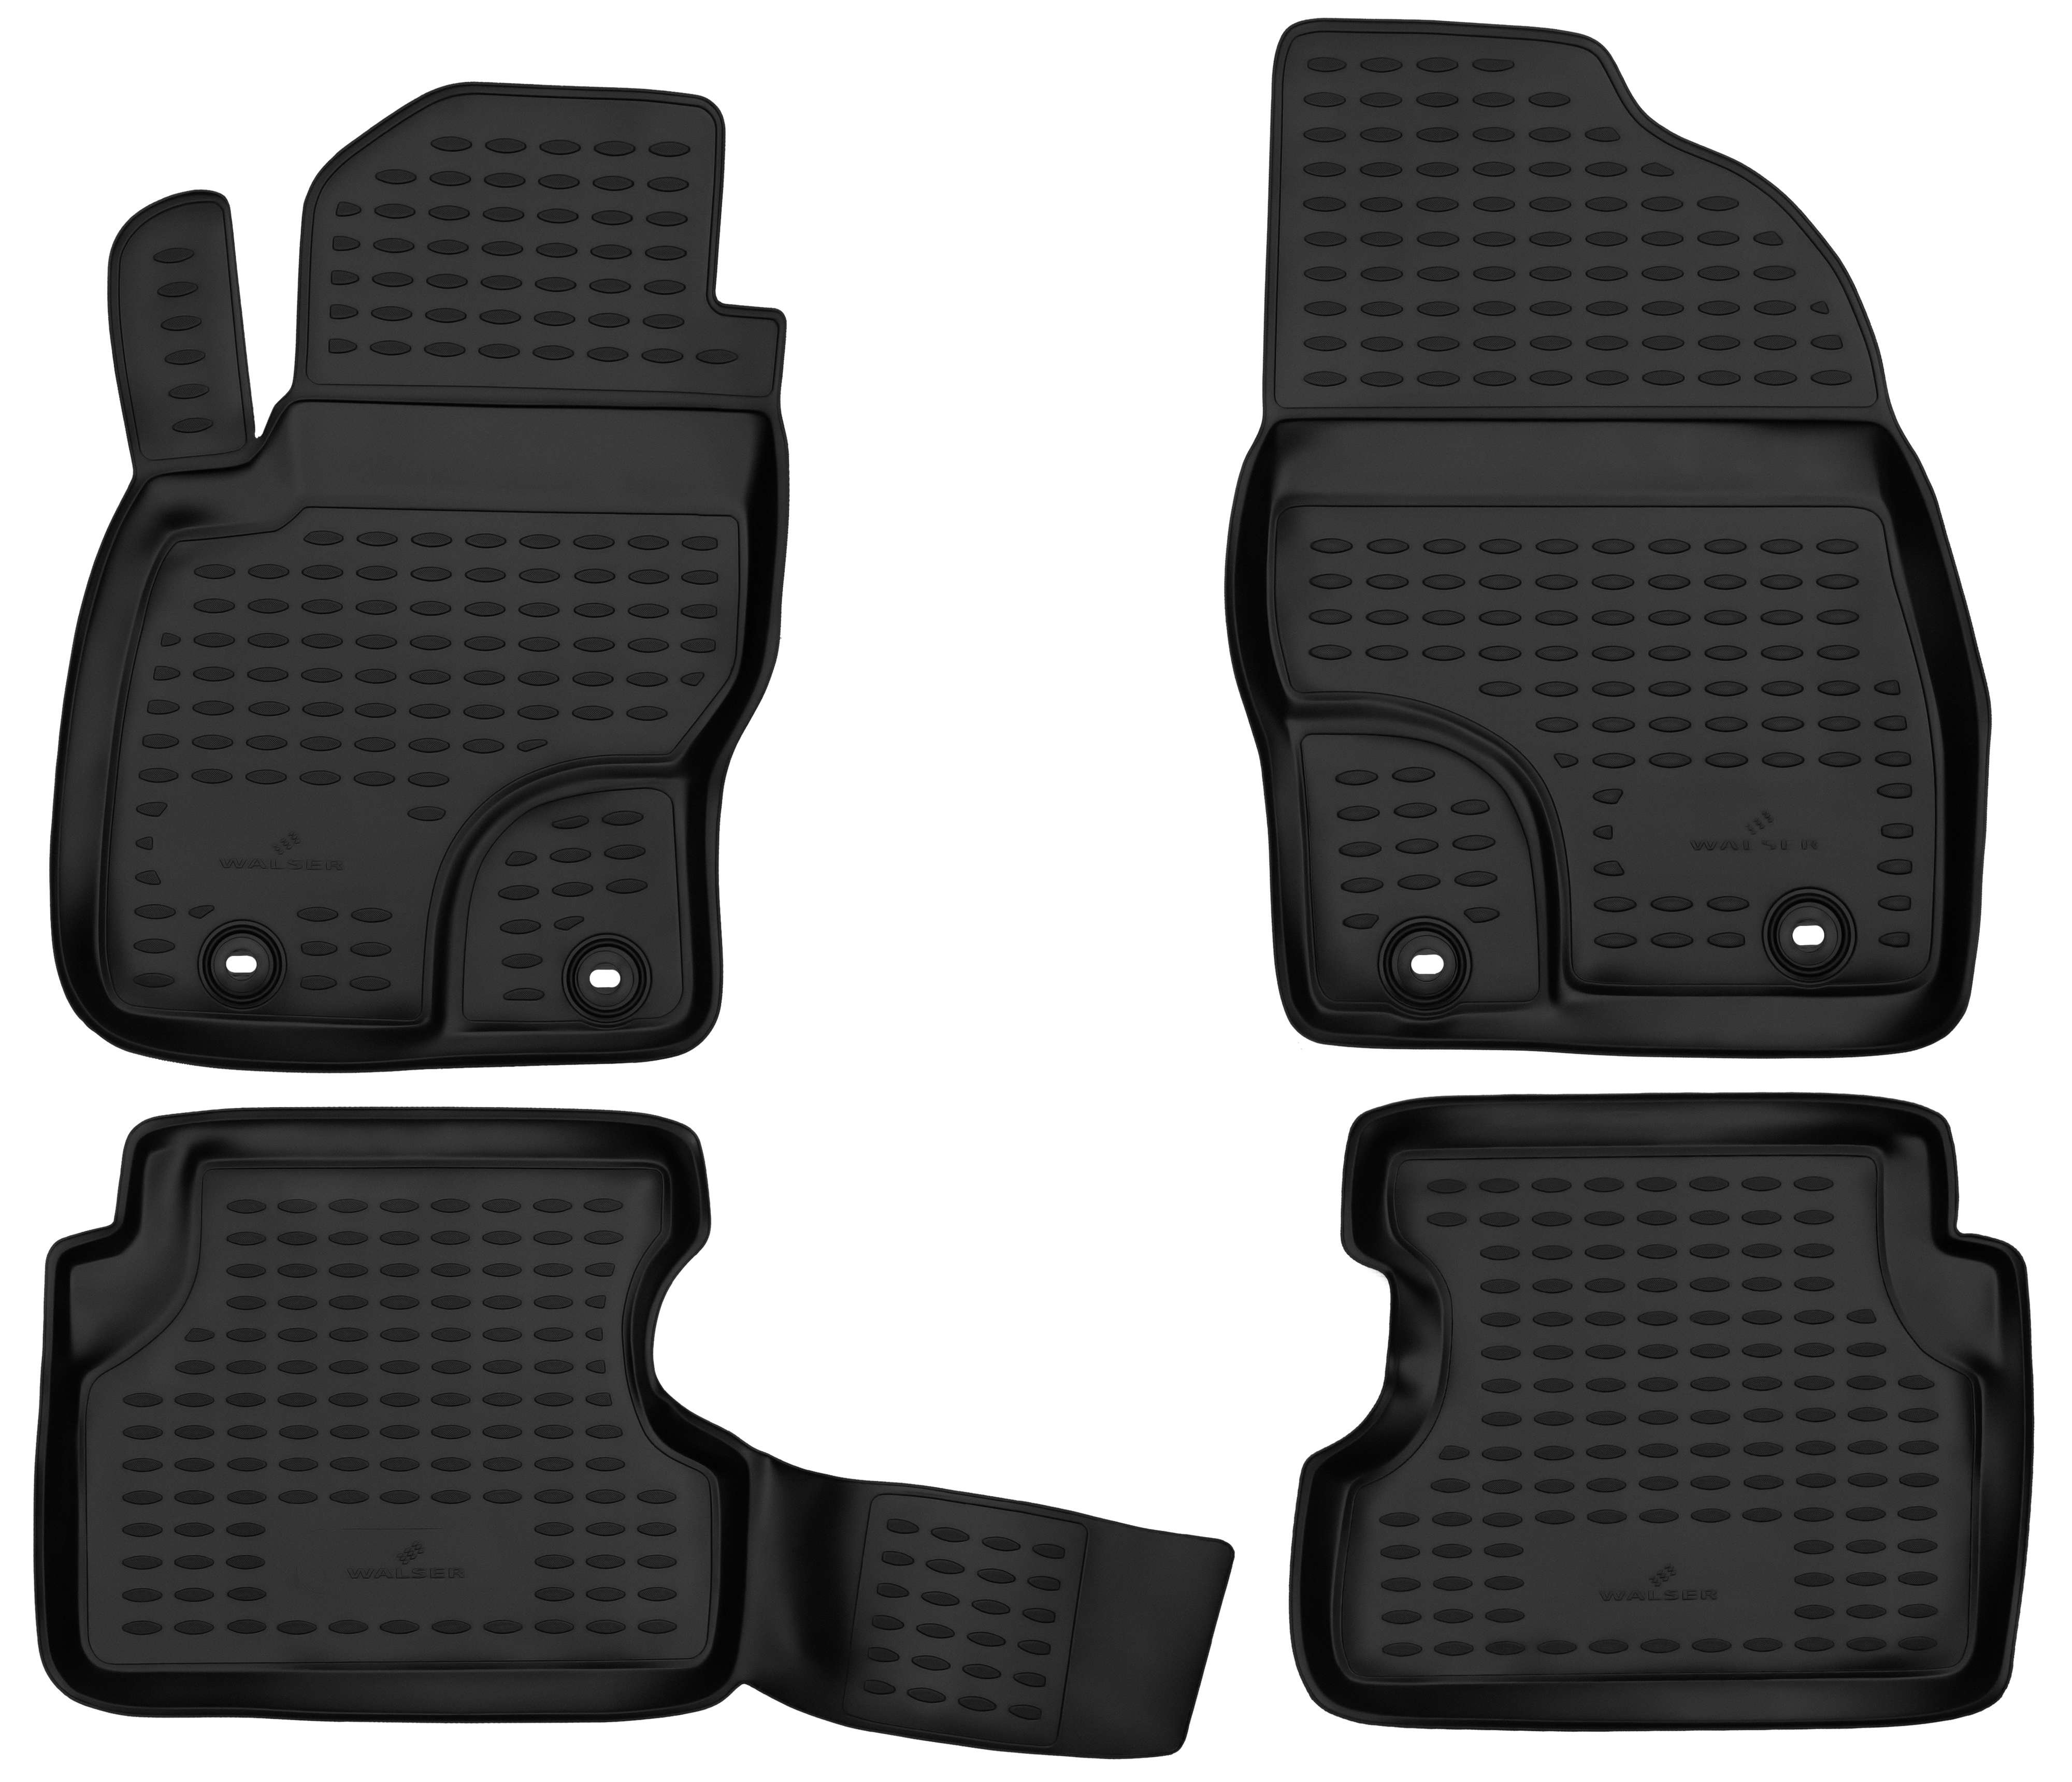 XTR Rubber Mats for Ford Focus II Turnier 07/2004 - 09/2012, Focus II notchback 04/2005-Today, Focus II Cabriolet 10/2006 - 09/2010